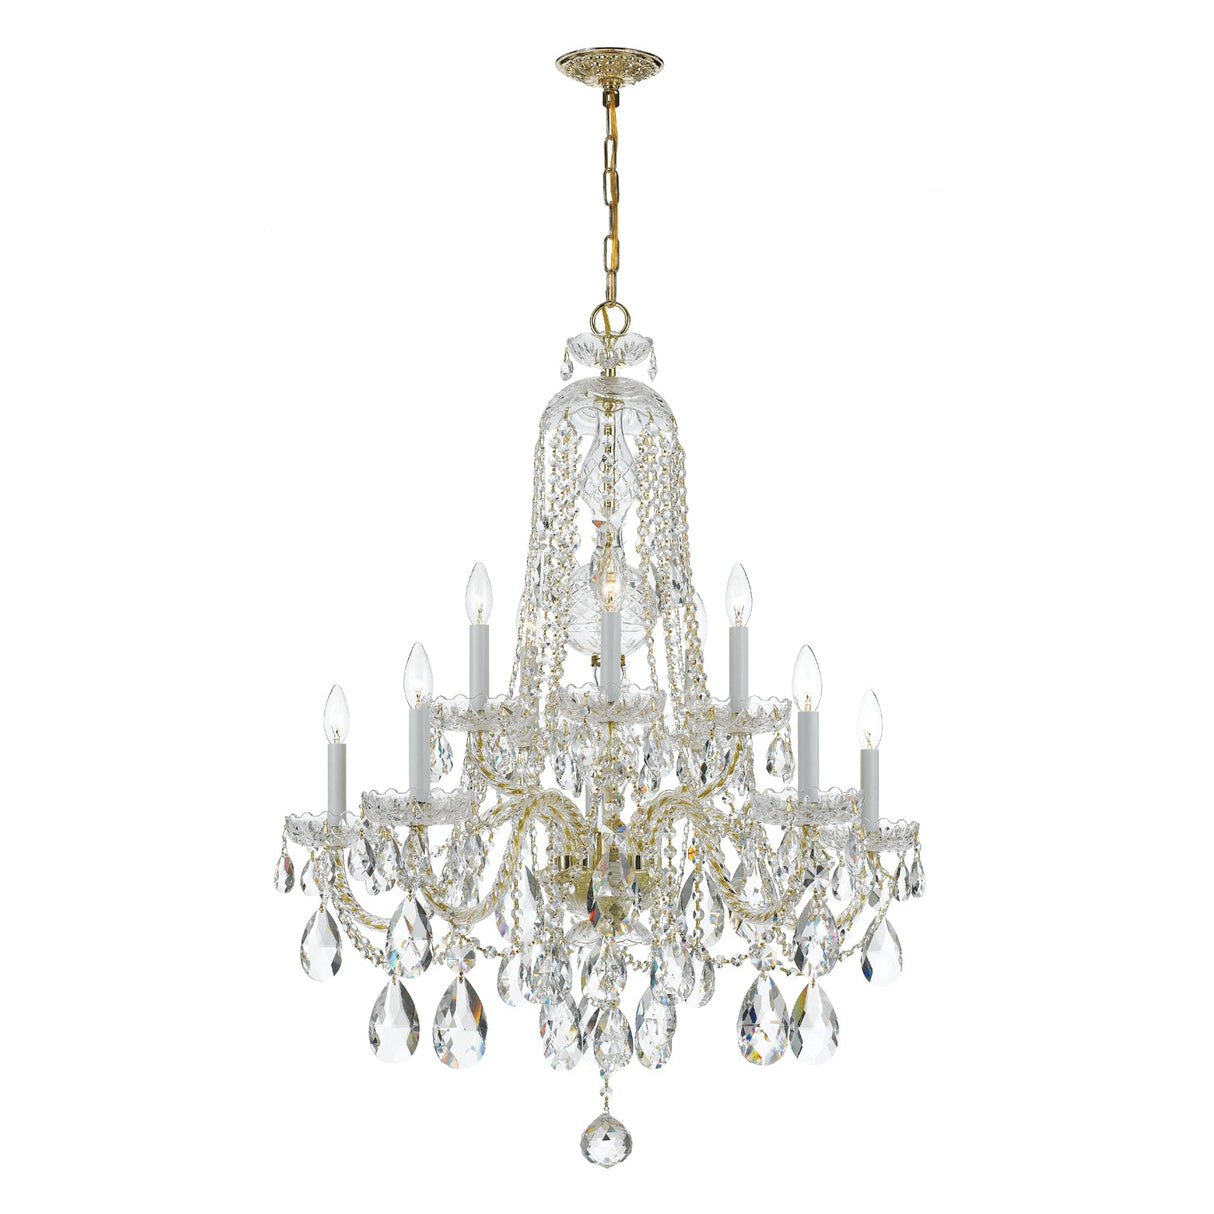 Traditional Crystal 10 Light Spectra Crystal Polished Brass Chandelier 1110-PB-CL-SAQ